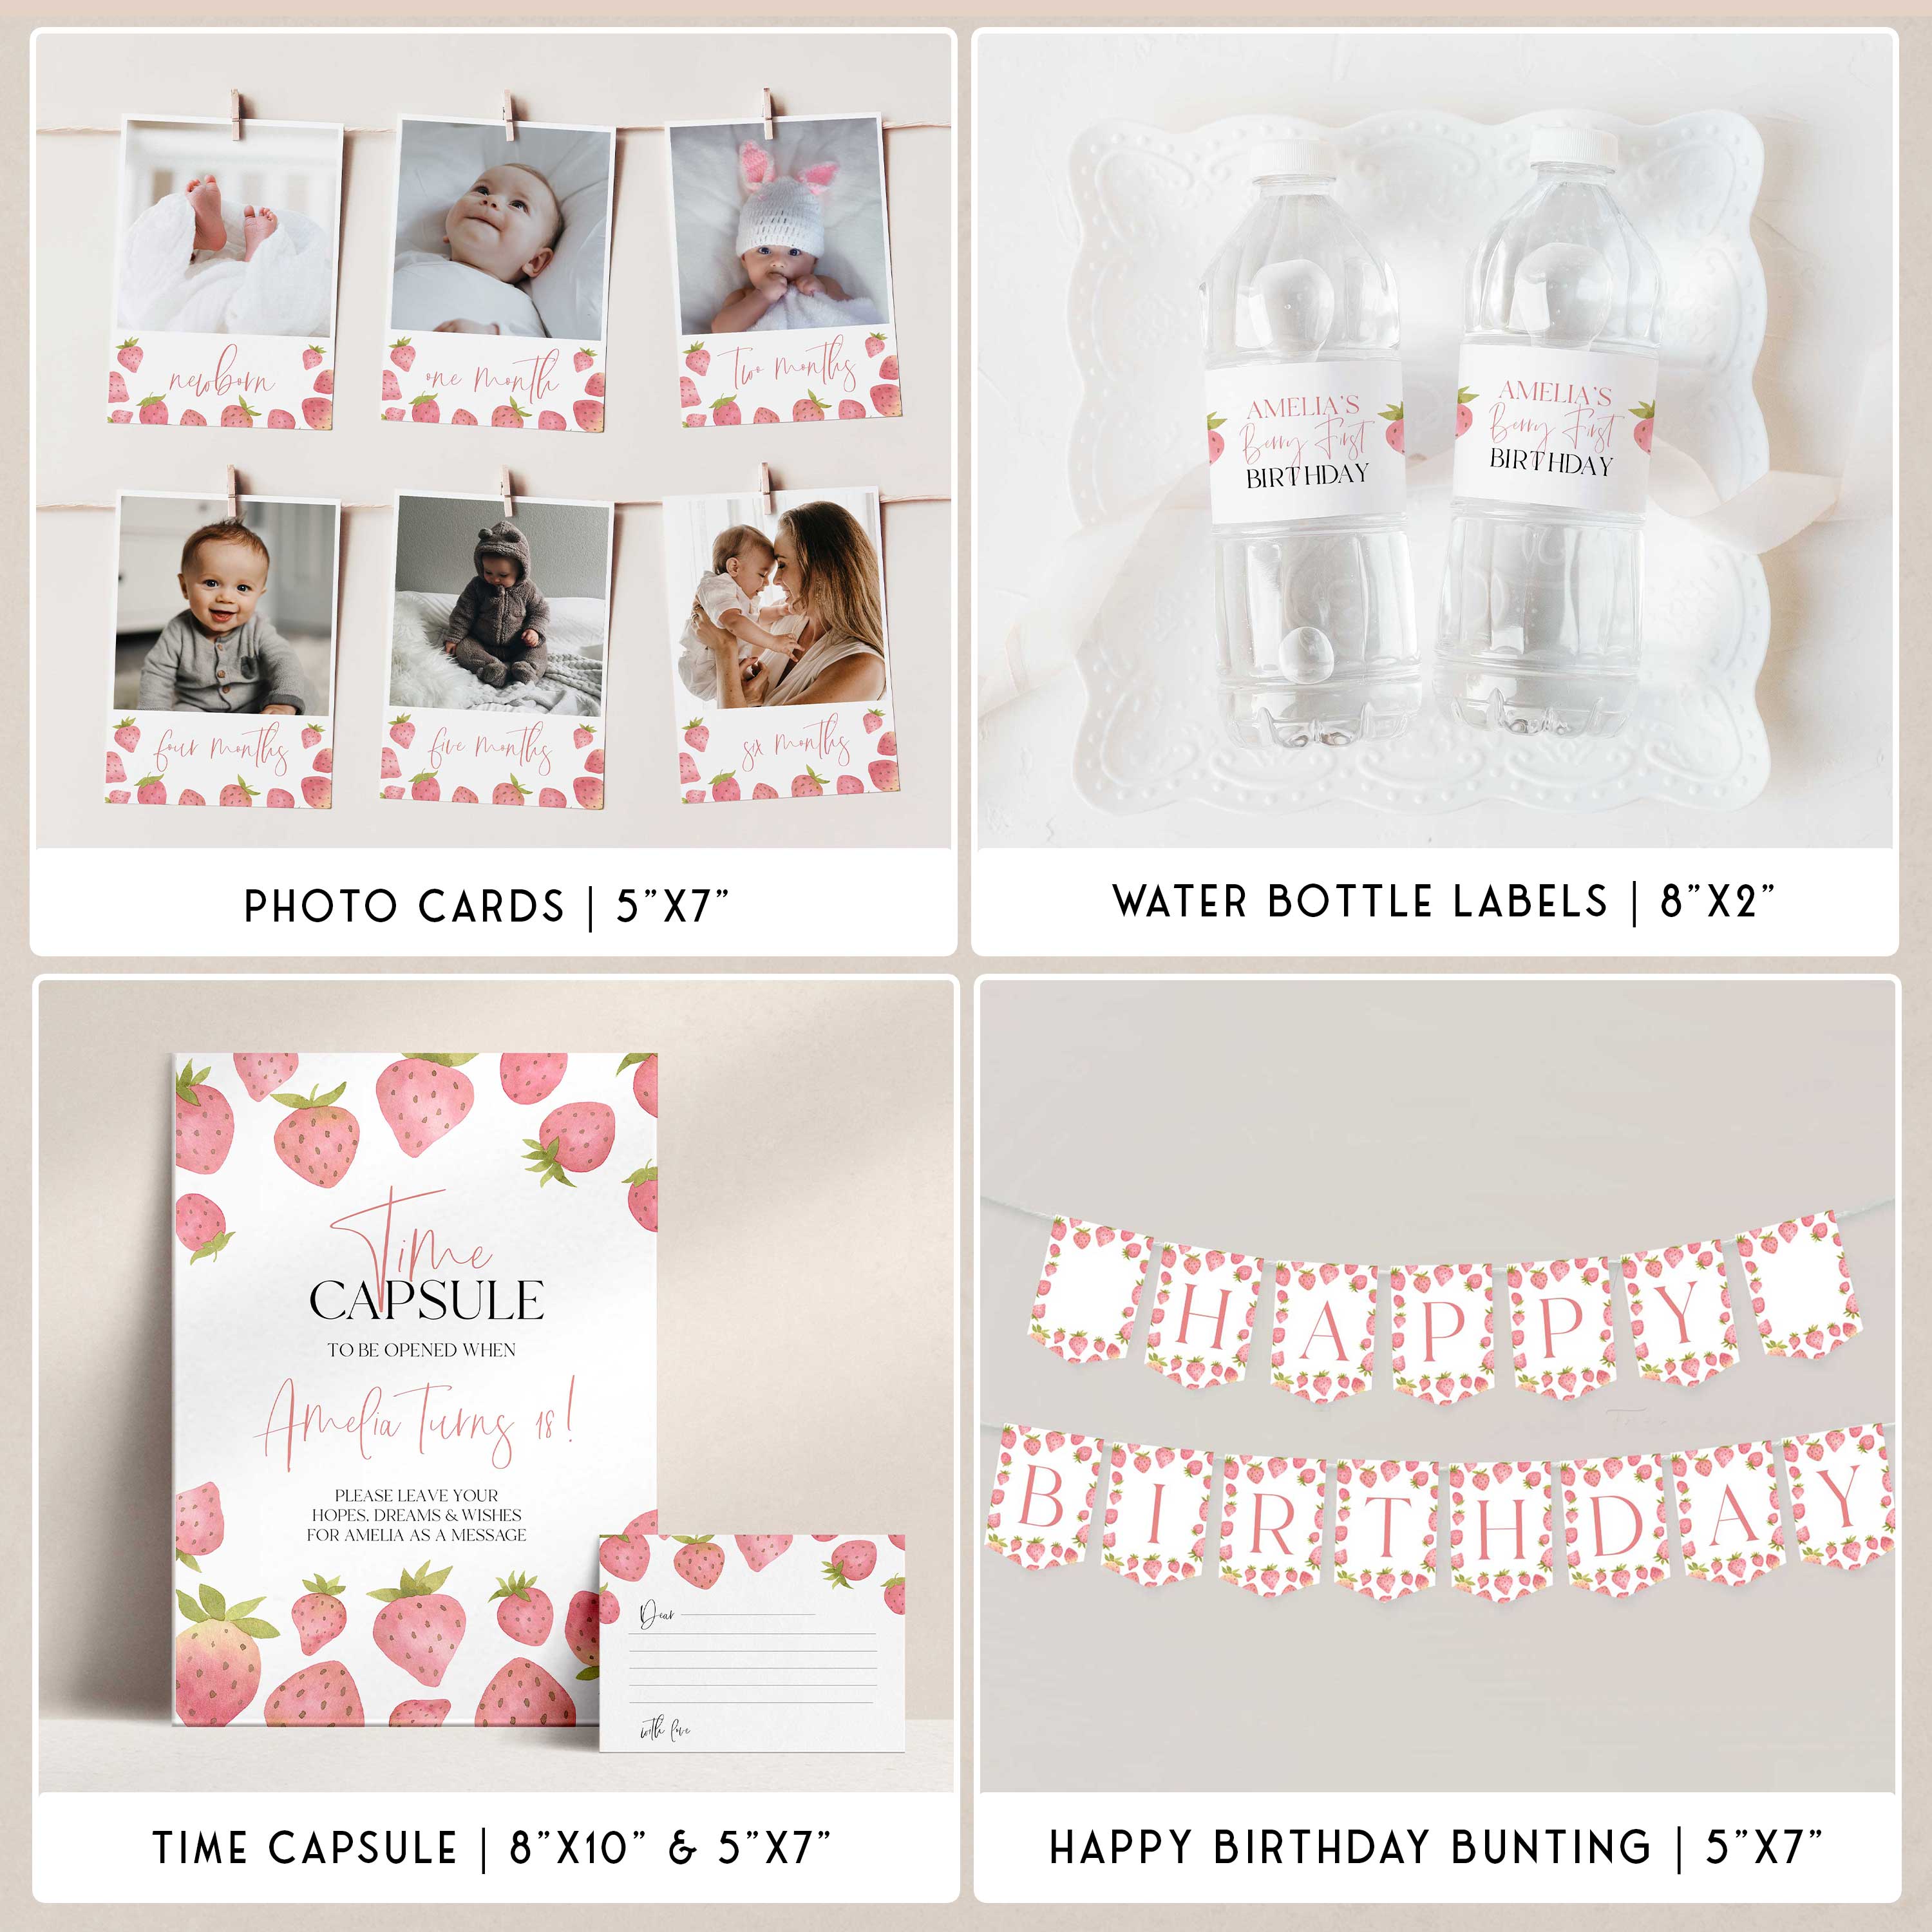 Berry first birthday party bundle including invitations, welcome signs, my first year, bunting, table signs, food labels, tags and more